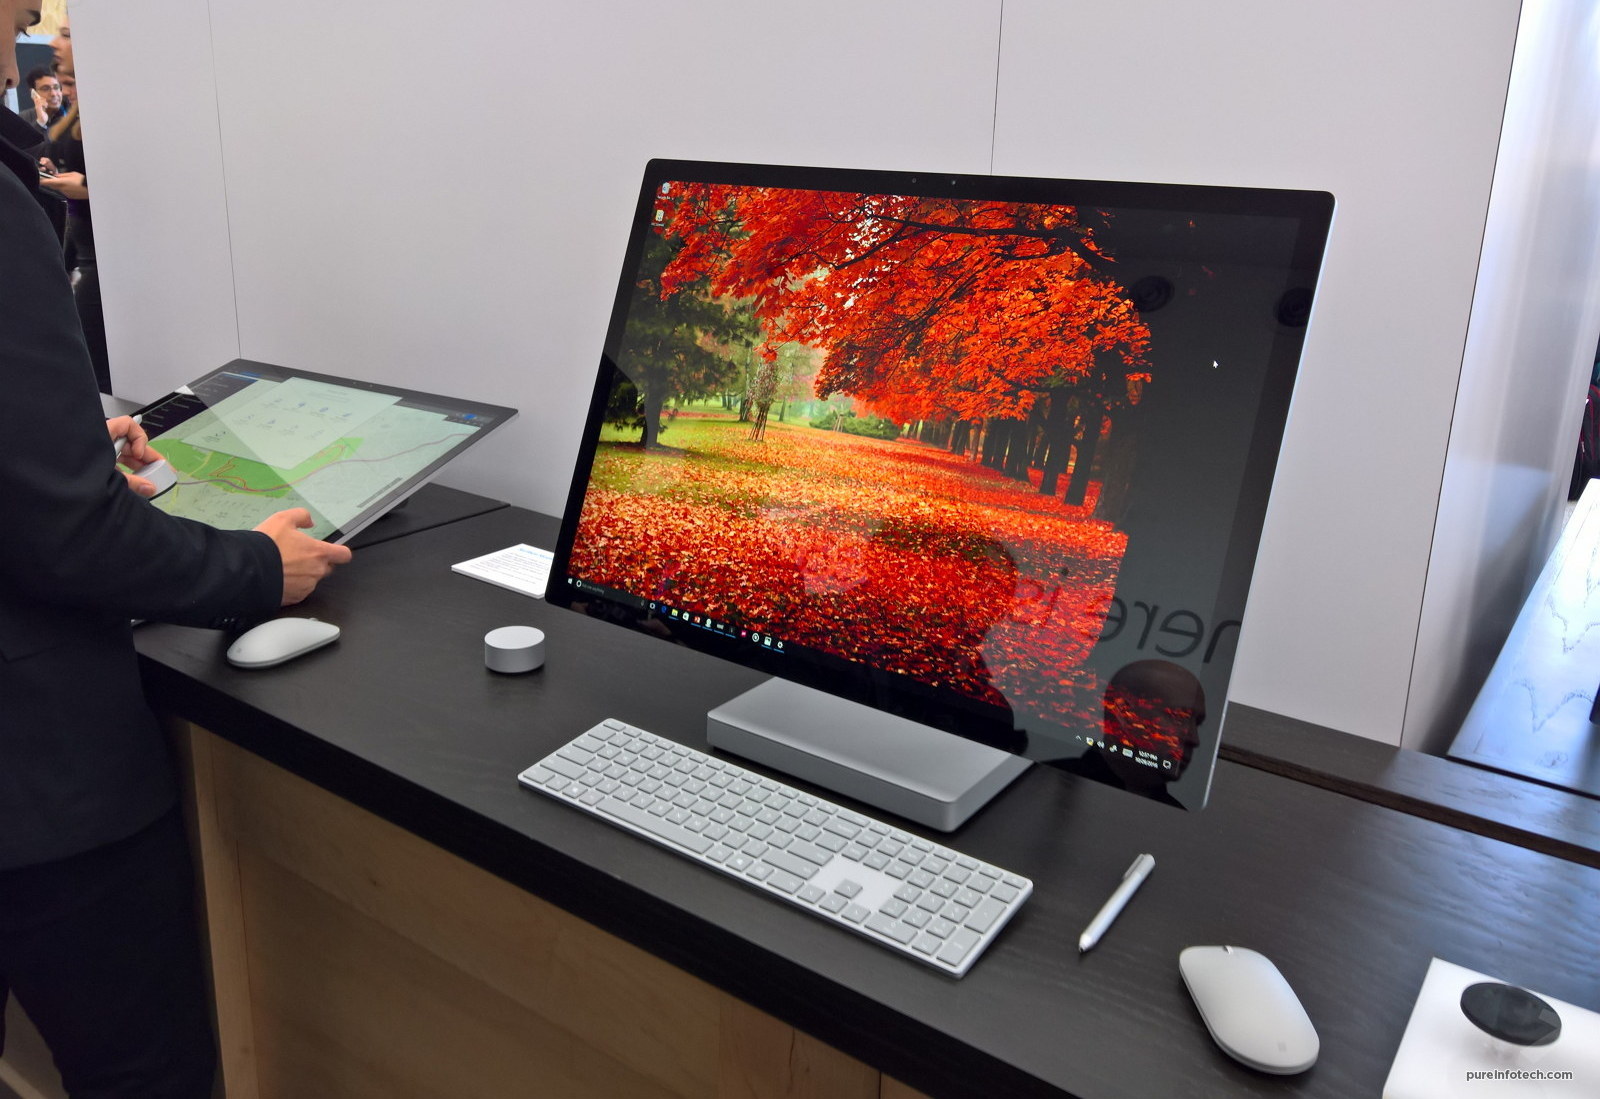 Microsoft Surface Studio full tech specs and features - Pureinfotech